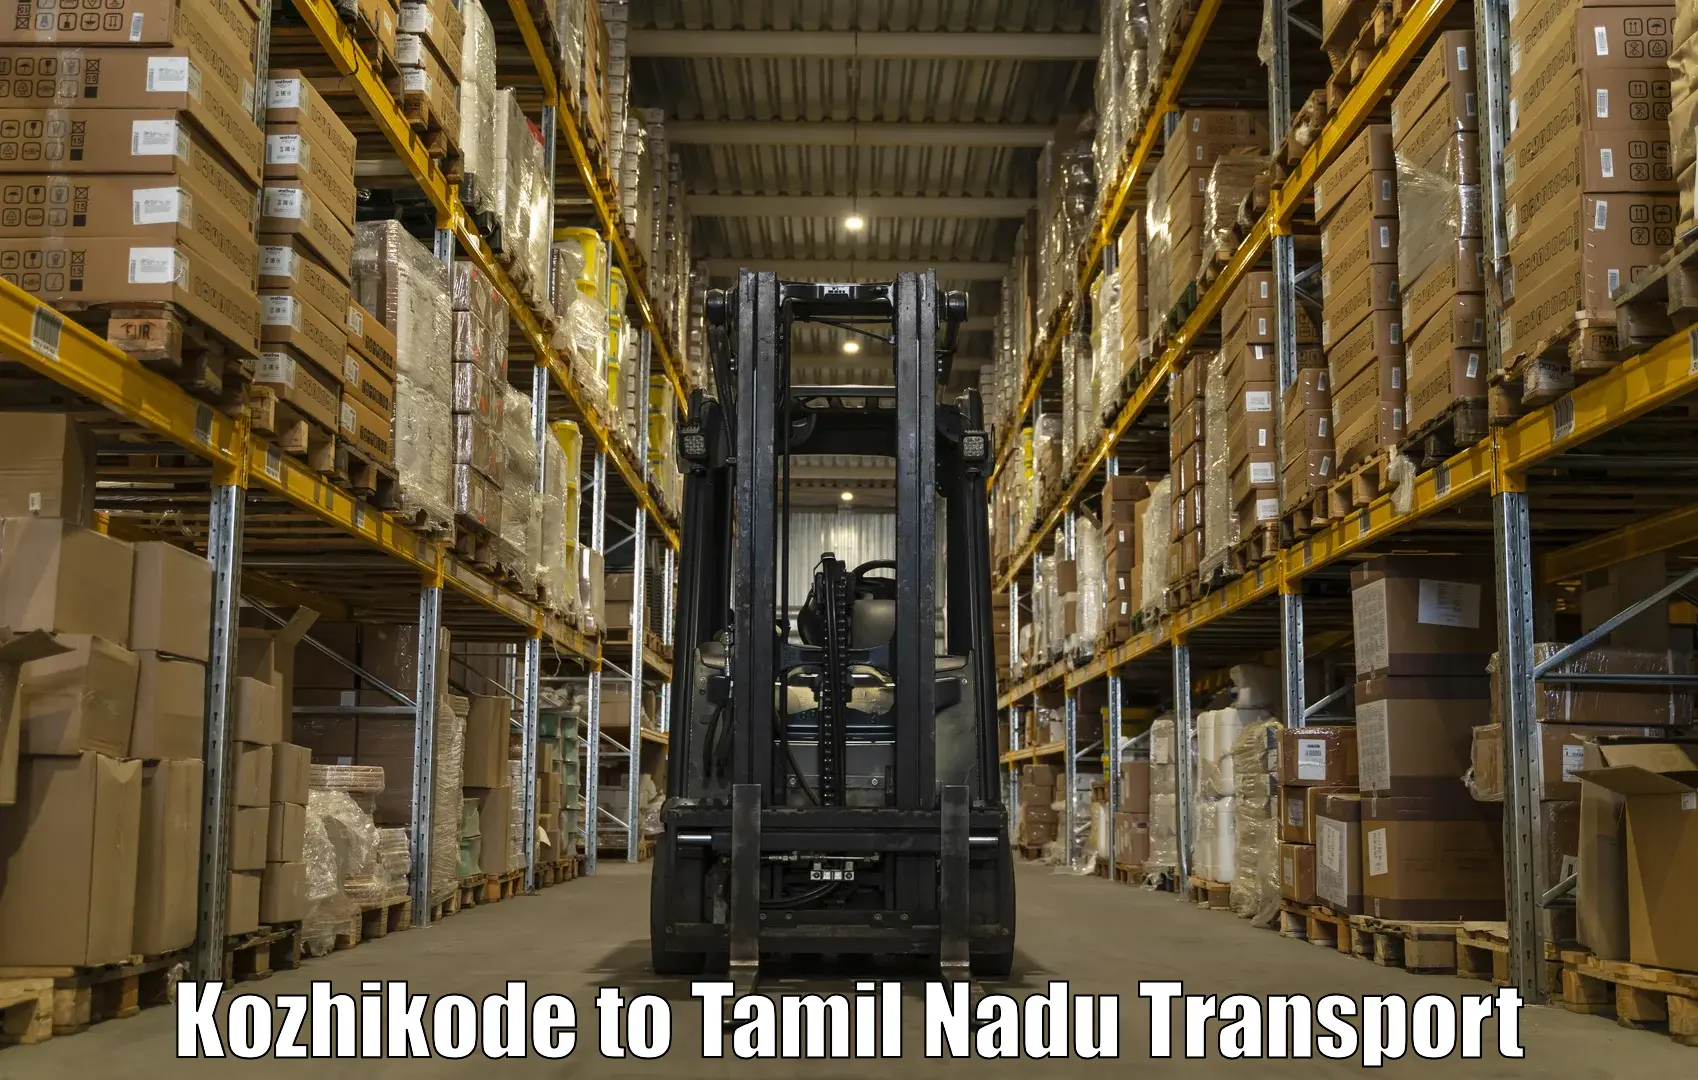 Nearby transport service Kozhikode to Tiruppur